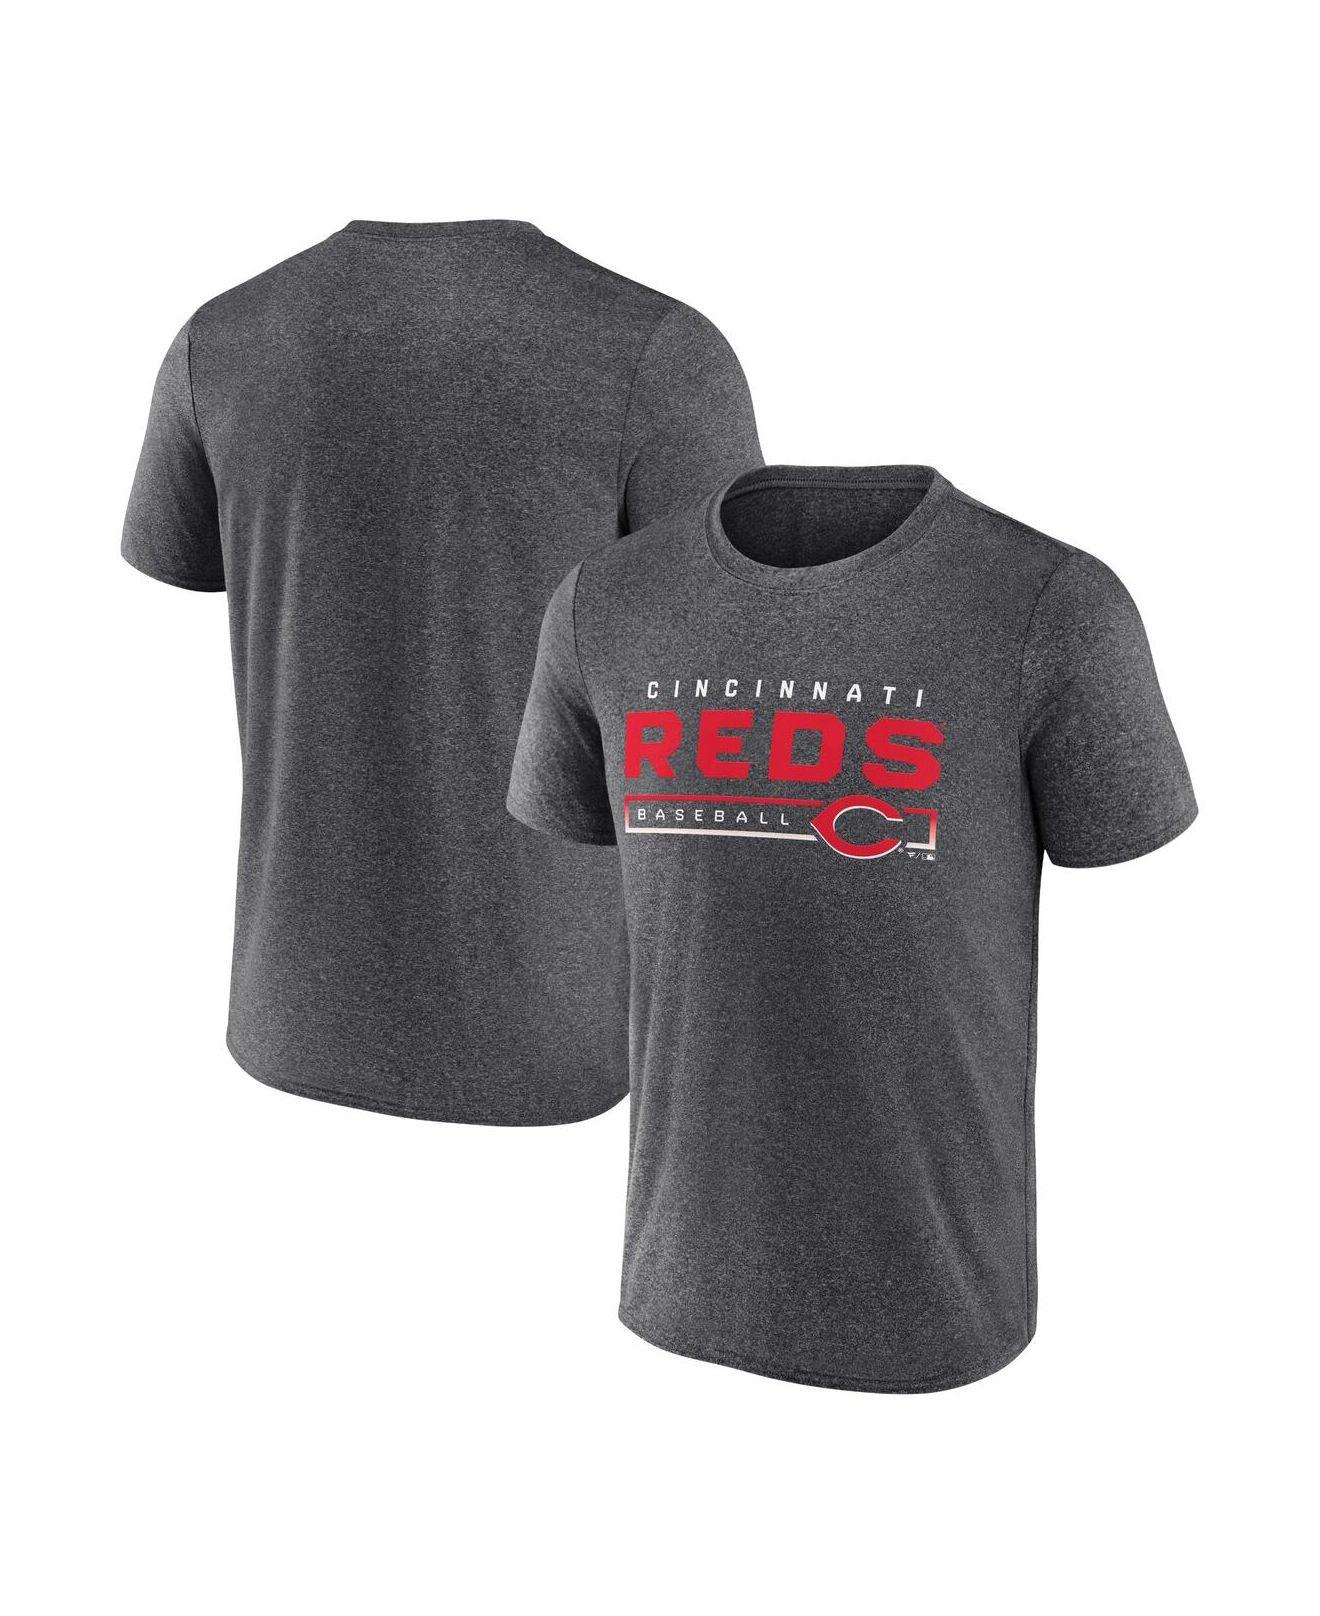 Boston Red Sox Fanatics Branded Weathered Official Logo Tri-Blend T-Shirt - Heathered Gray